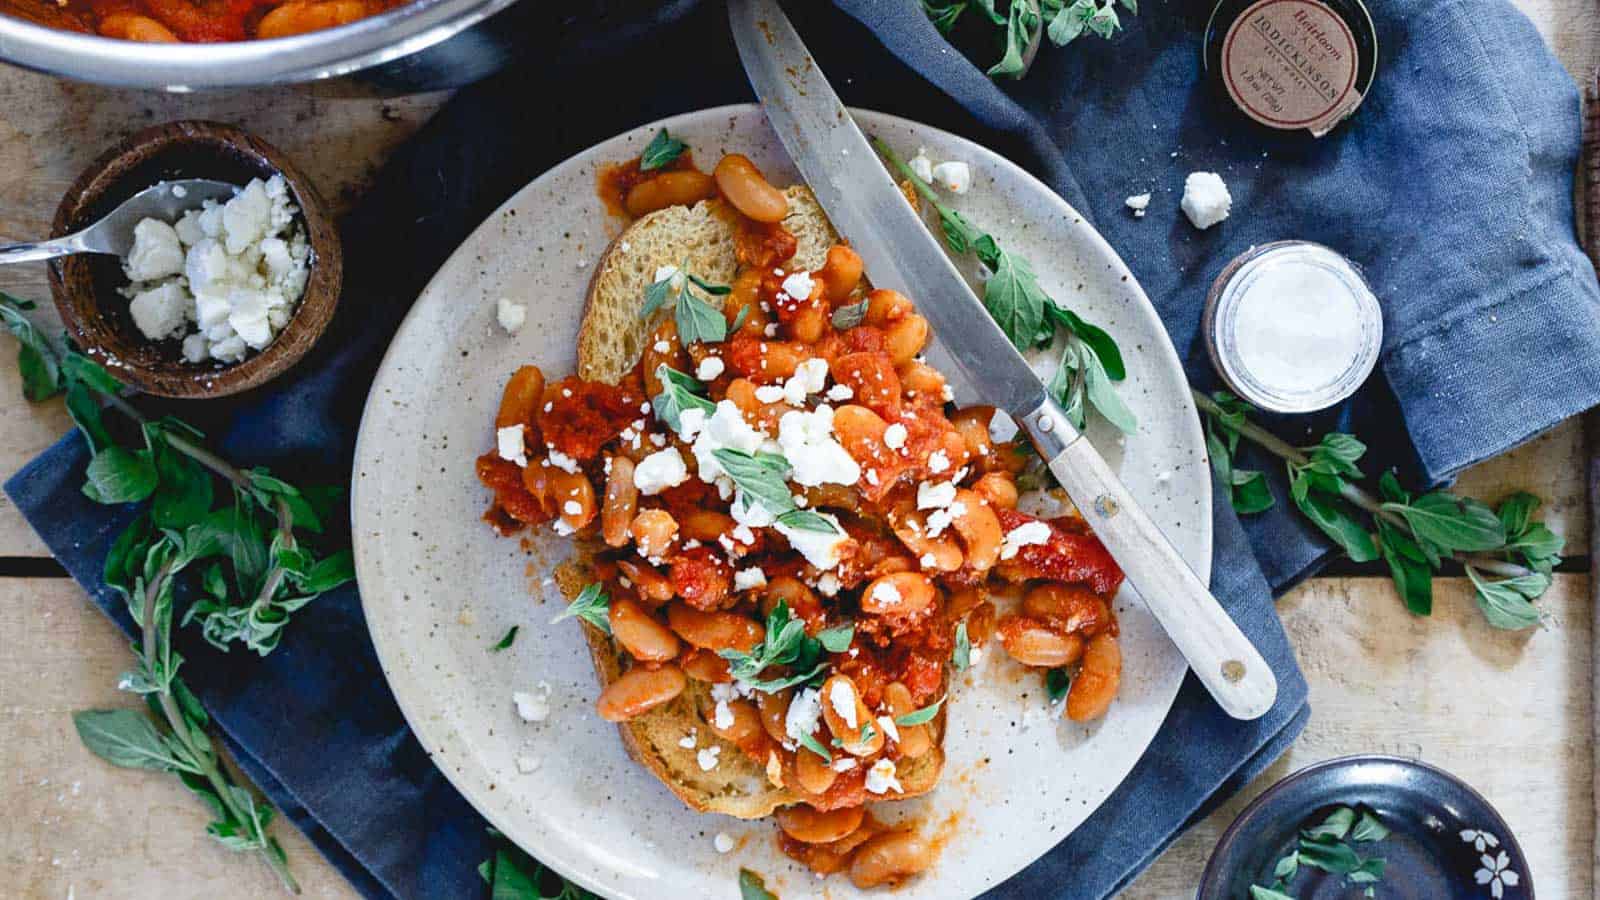 Chase away winter blues with 15 hot & hearty dinners